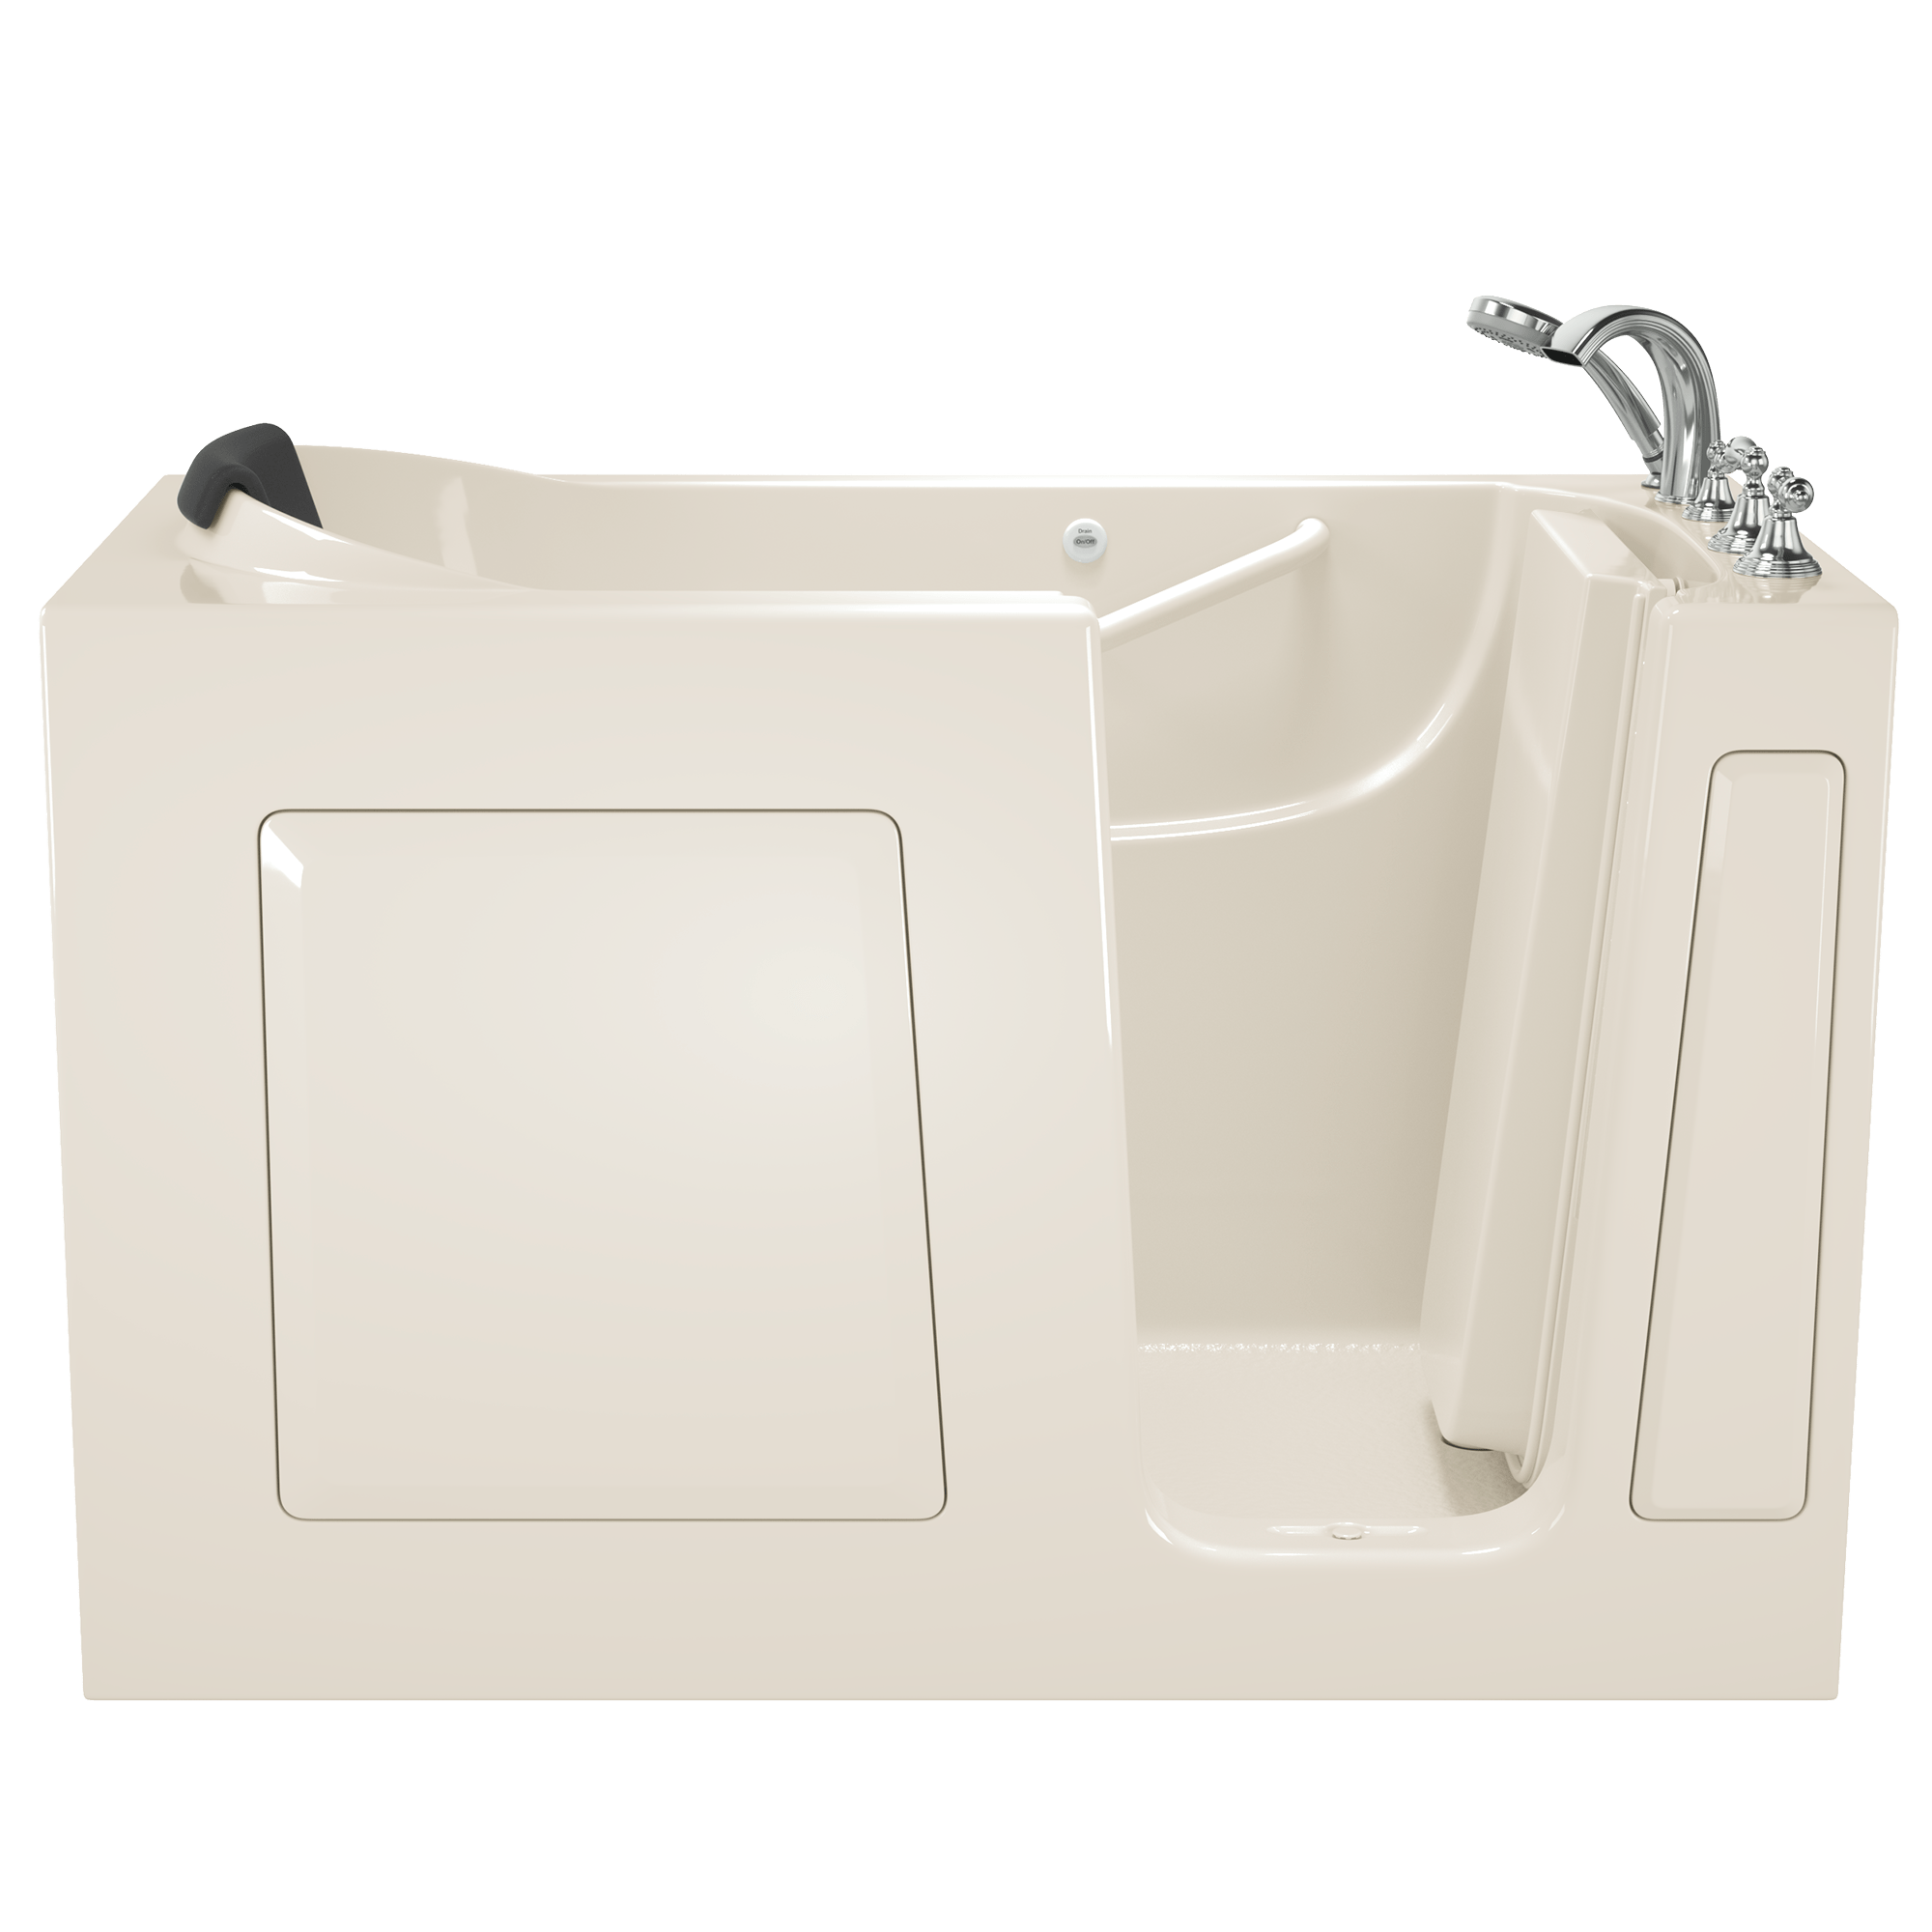 Gelcoat Premium Series 30 x 60 -Inch Walk-in Tub With Soaker System - Right-Hand Drain With Faucet